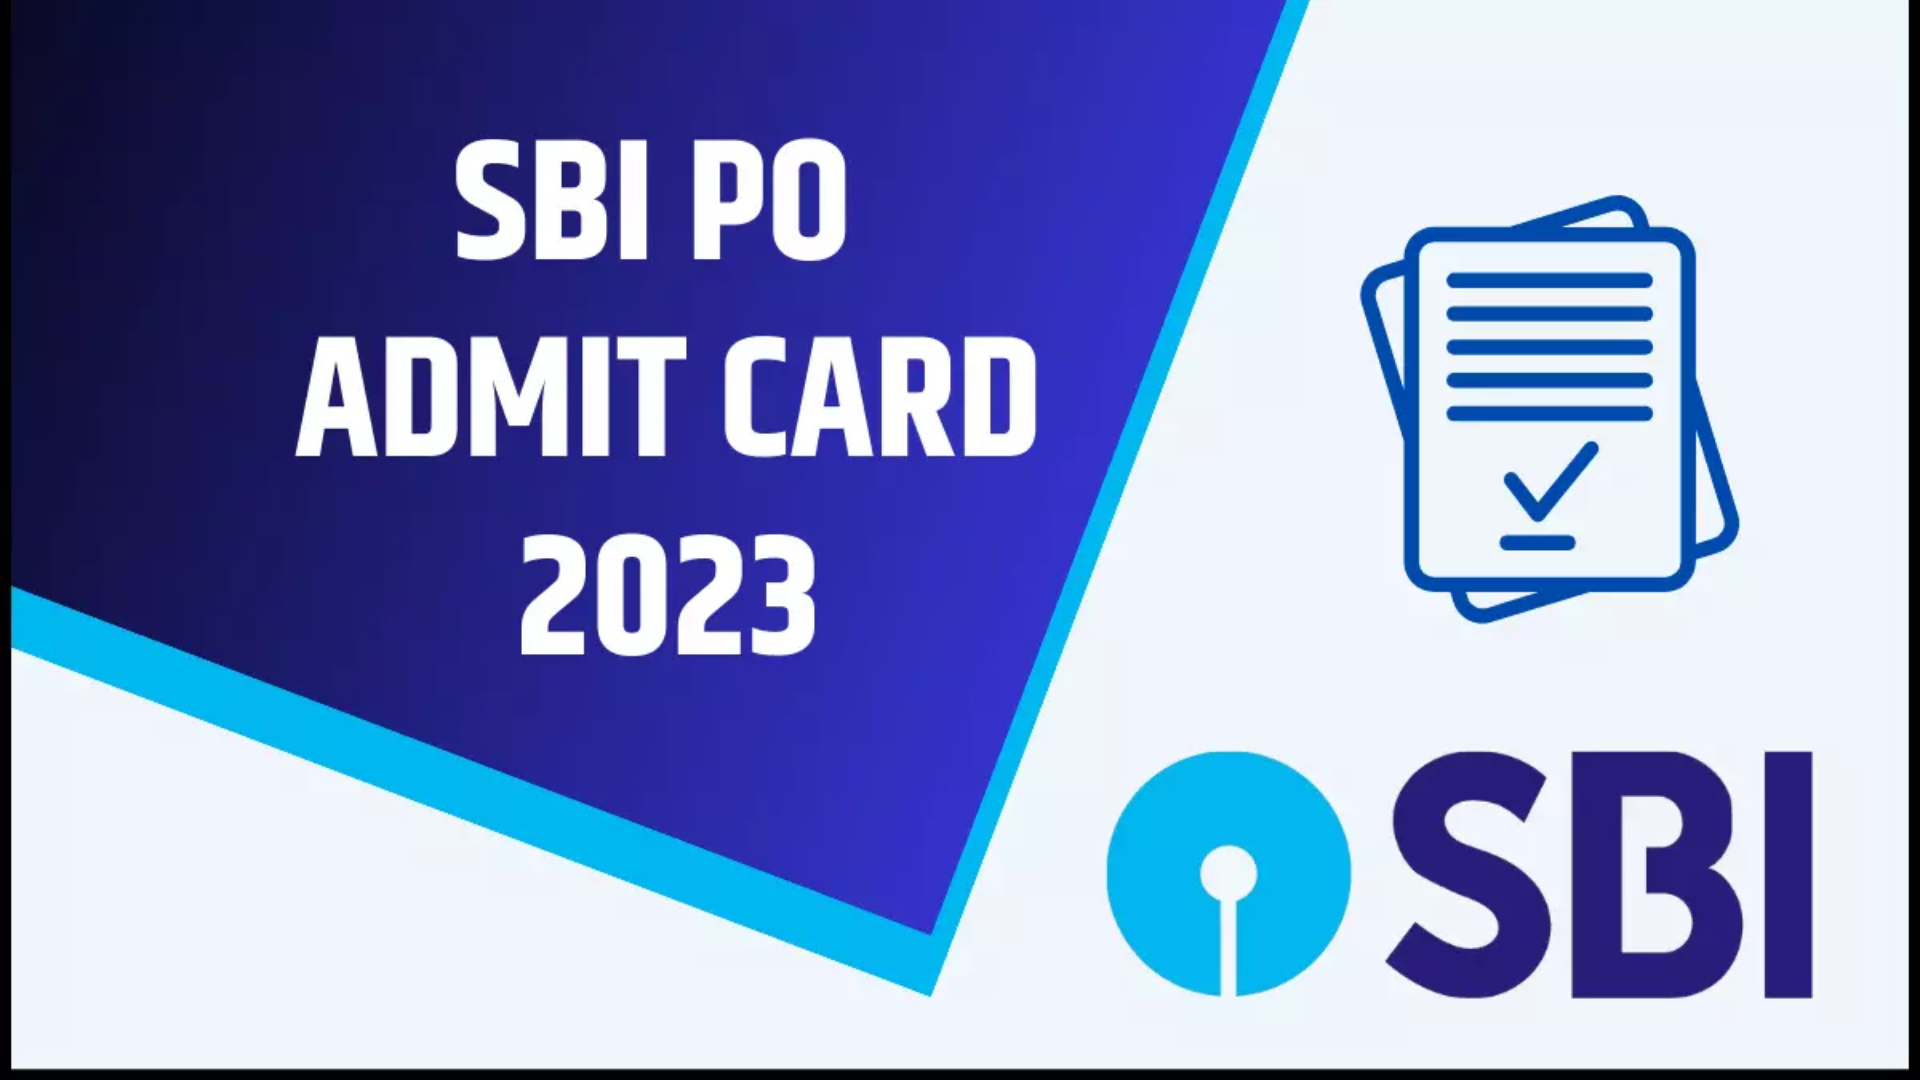 SBI PO Admit Card 2023 and Prelims Exam Date Latest Update, Download Pre Exam Training Material